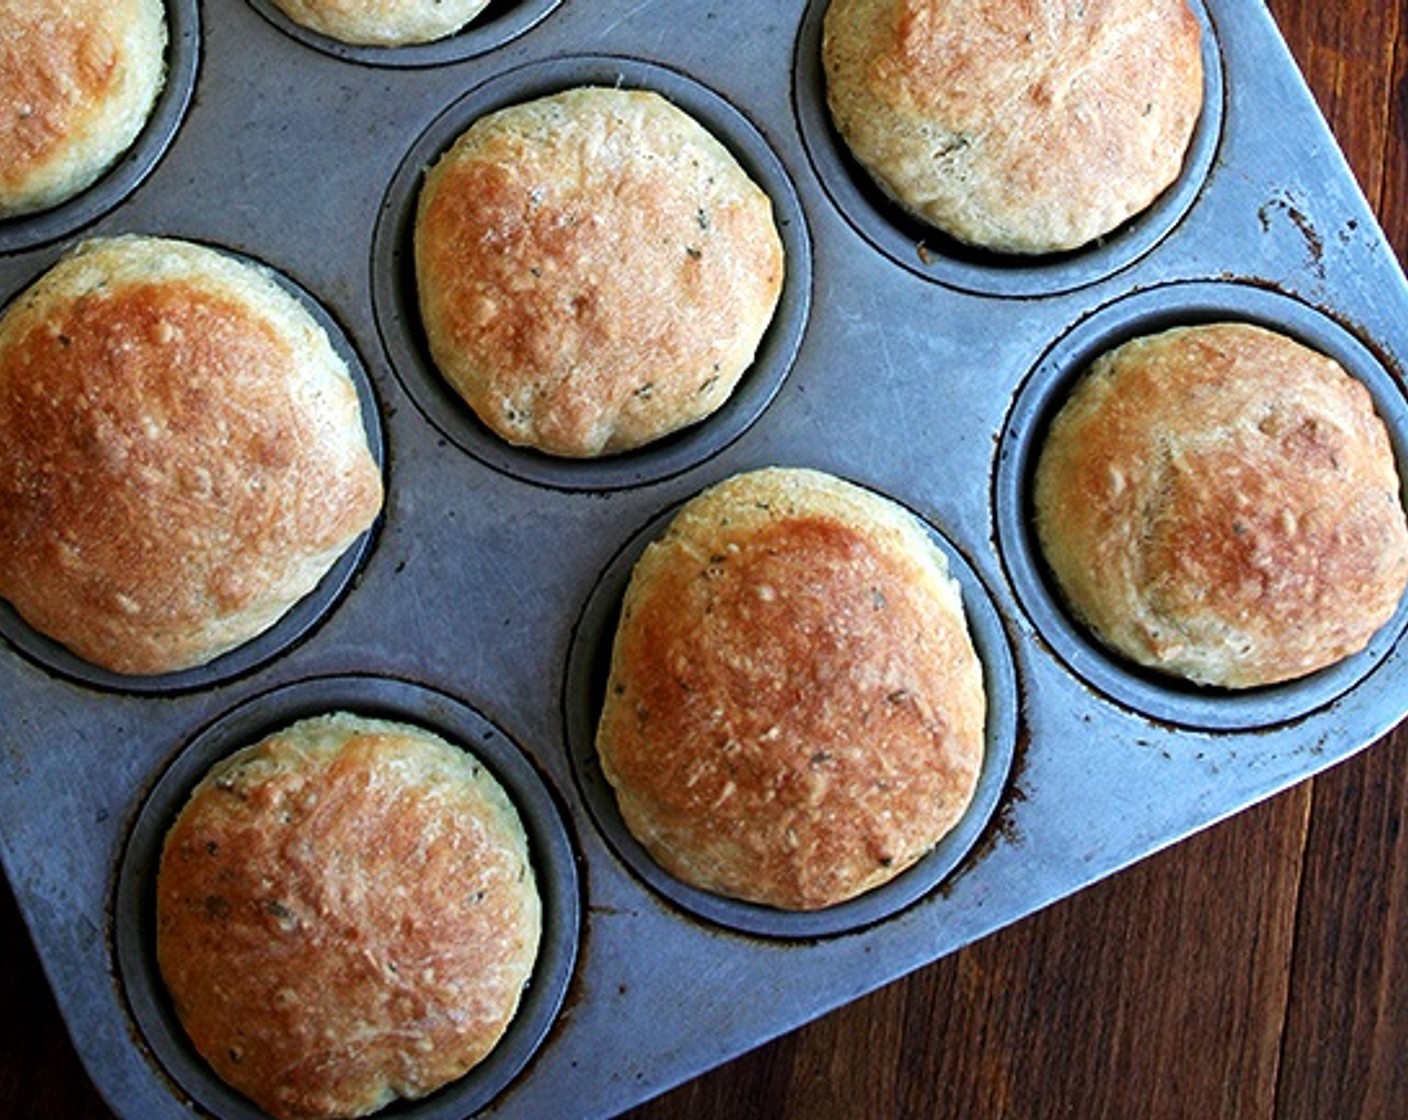 step 9 Reduce the heat to 375 degrees F (190 degrees C) and make for 10 to 15 minutes longer. Remove from the oven and turn the rolls onto a cooling rack or directly into a bread basket.